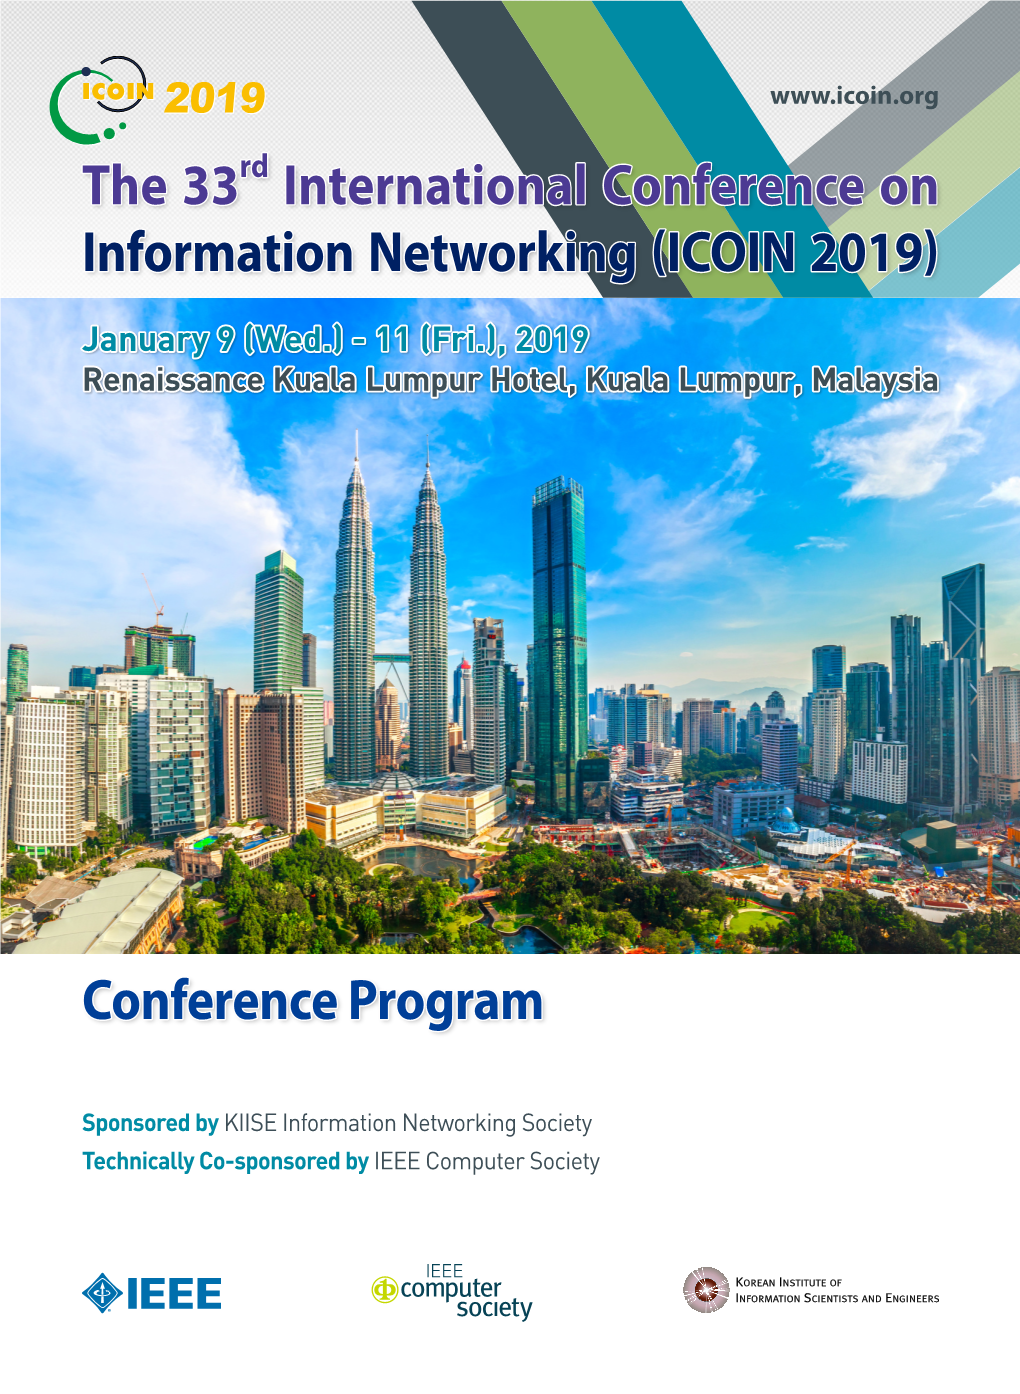 (ICOIN 2019) Conference Program